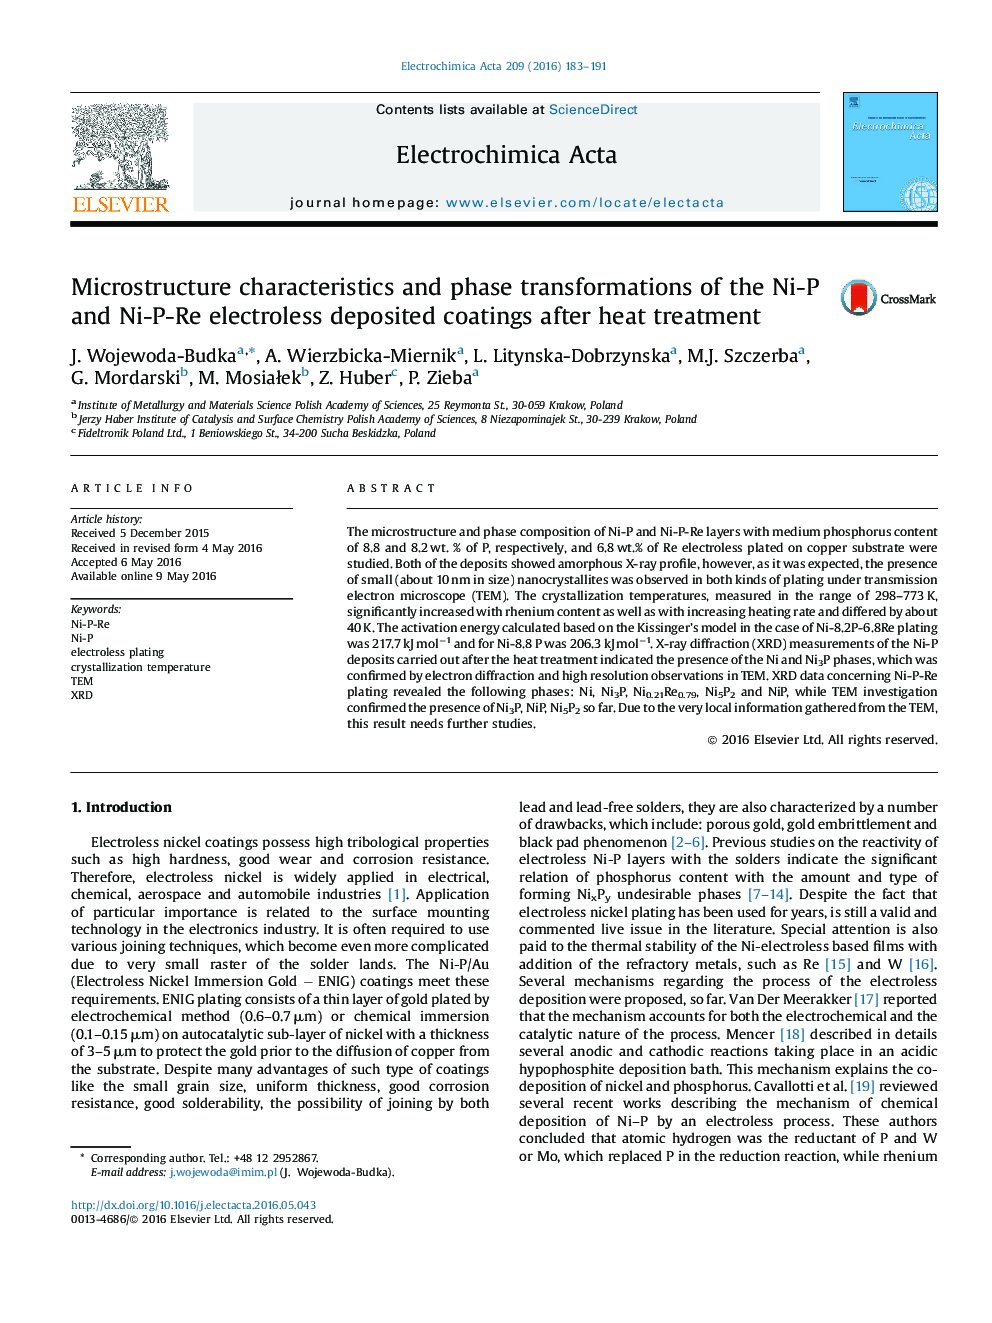 Microstructure characteristics and phase transformations of the Ni-P and Ni-P-Re electroless deposited coatings after heat treatment